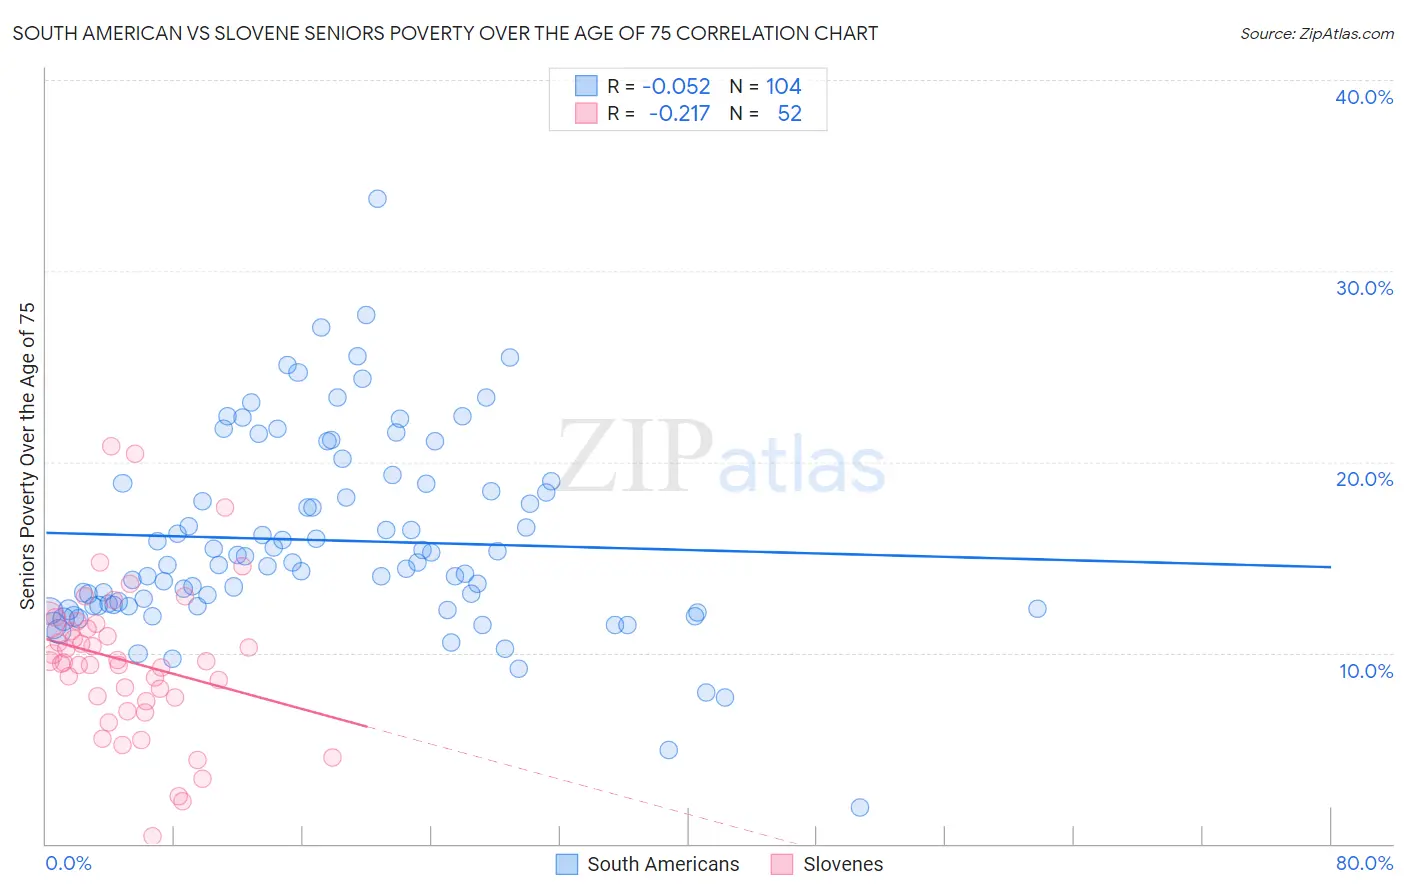 South American vs Slovene Seniors Poverty Over the Age of 75